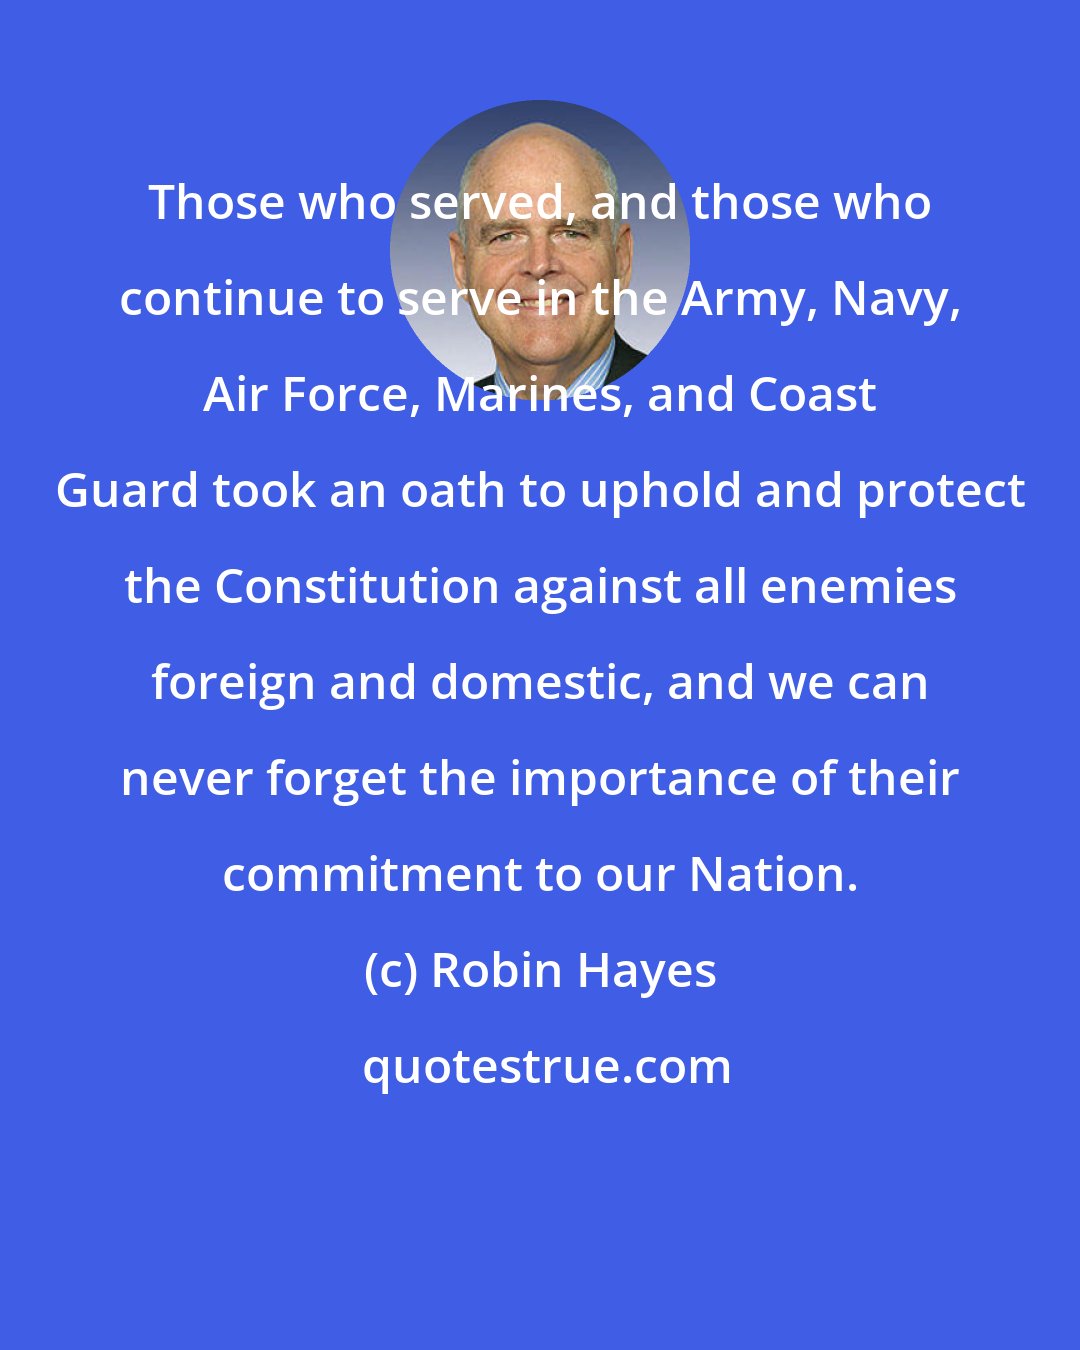 Robin Hayes: Those who served, and those who continue to serve in the Army, Navy, Air Force, Marines, and Coast Guard took an oath to uphold and protect the Constitution against all enemies foreign and domestic, and we can never forget the importance of their commitment to our Nation.